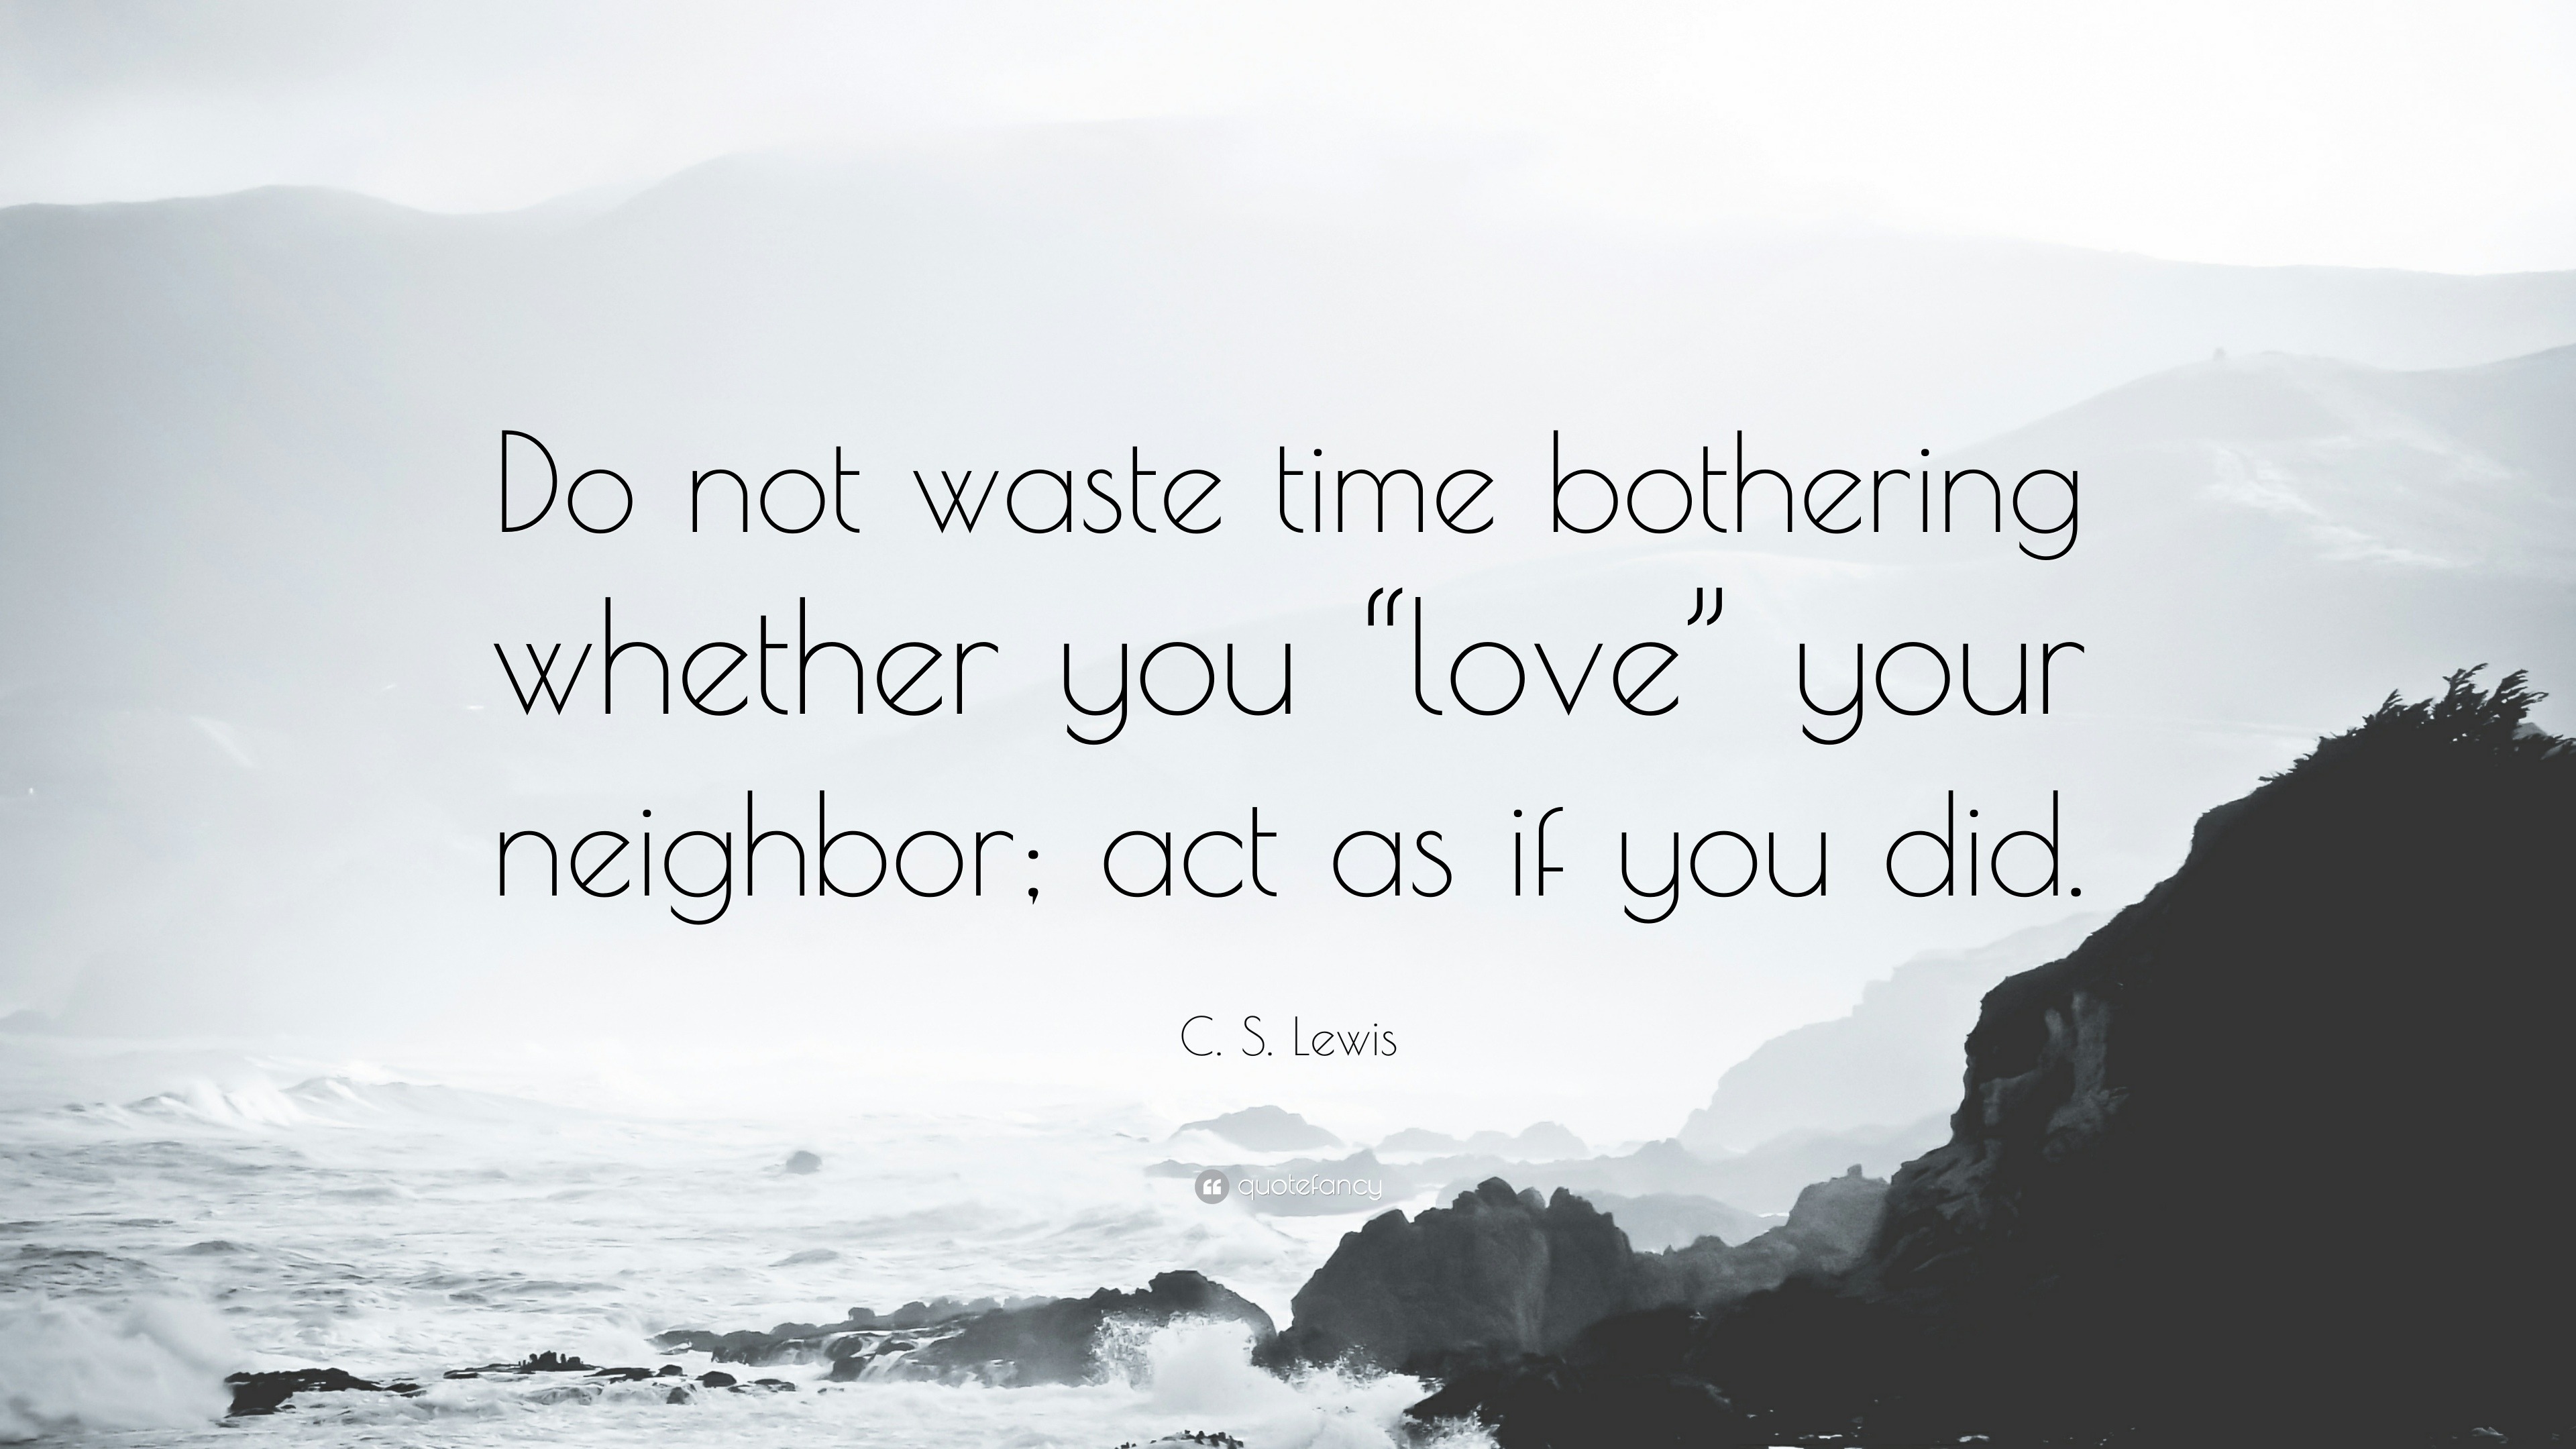 C S Lewis Quote “Do not waste time bothering whether you “love” your